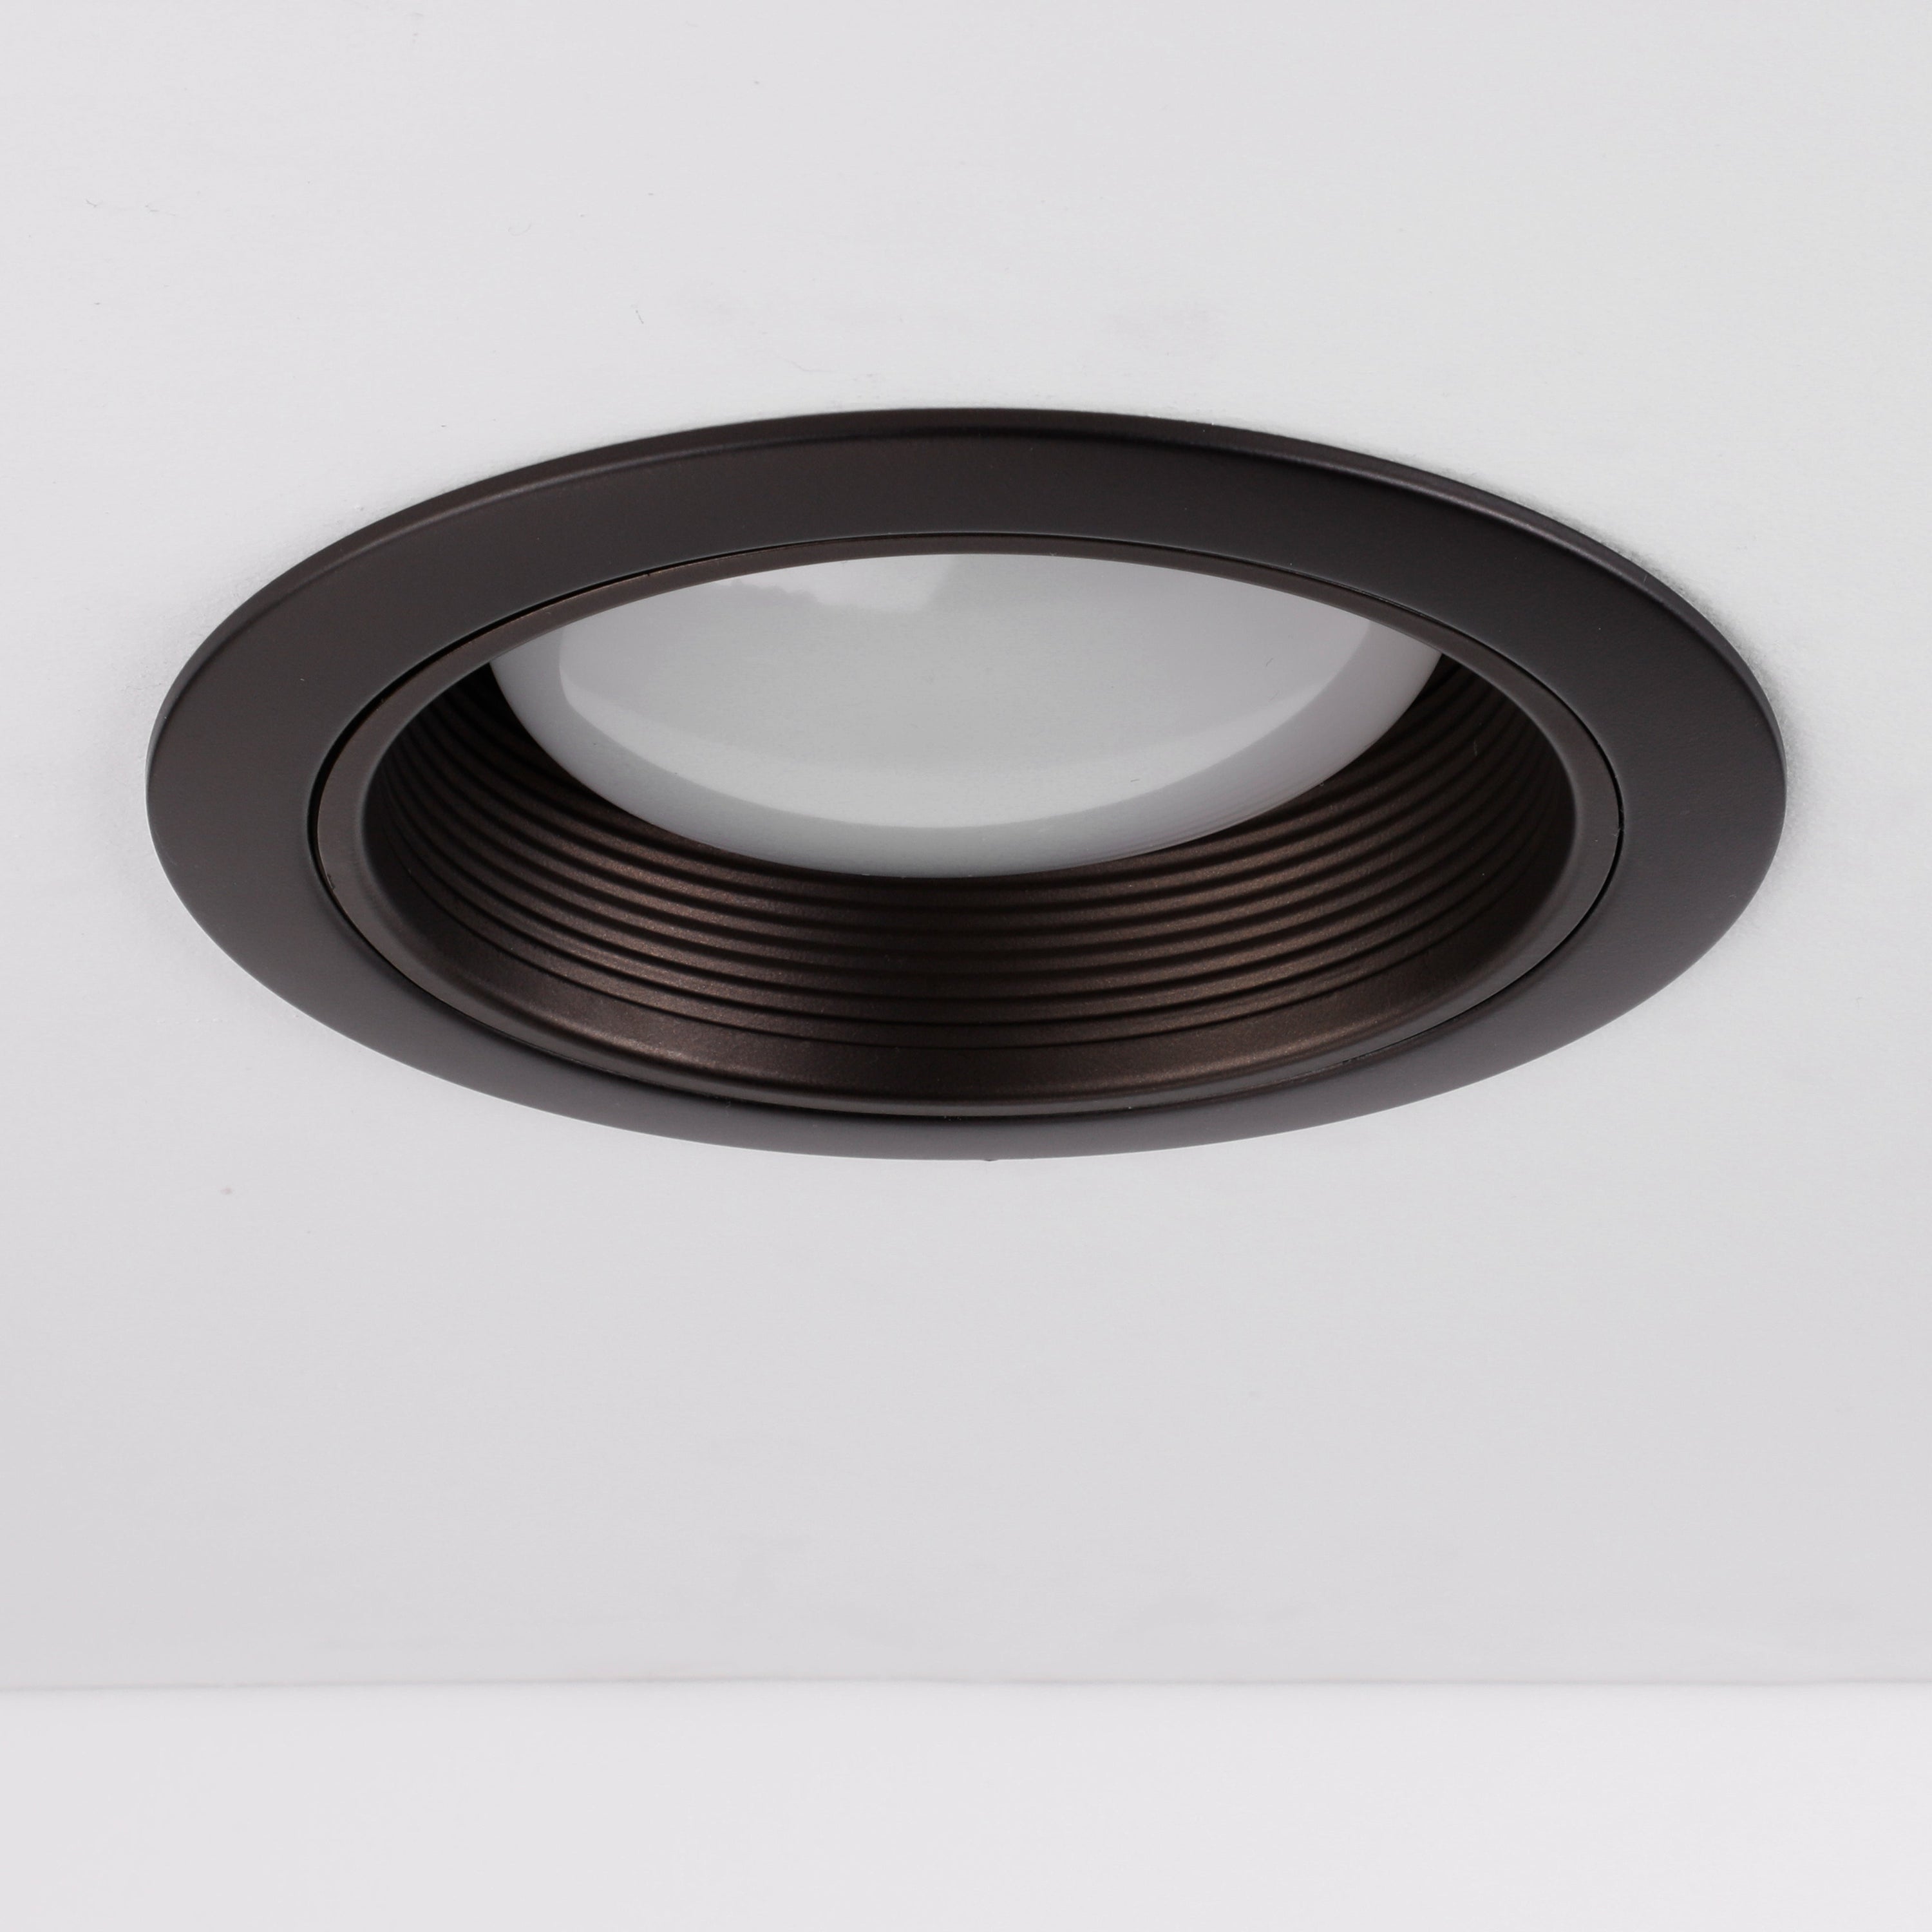 TORCHSTAR 6" Stepped Baffle with Detachable Trim - Oil Rubbed Bronze